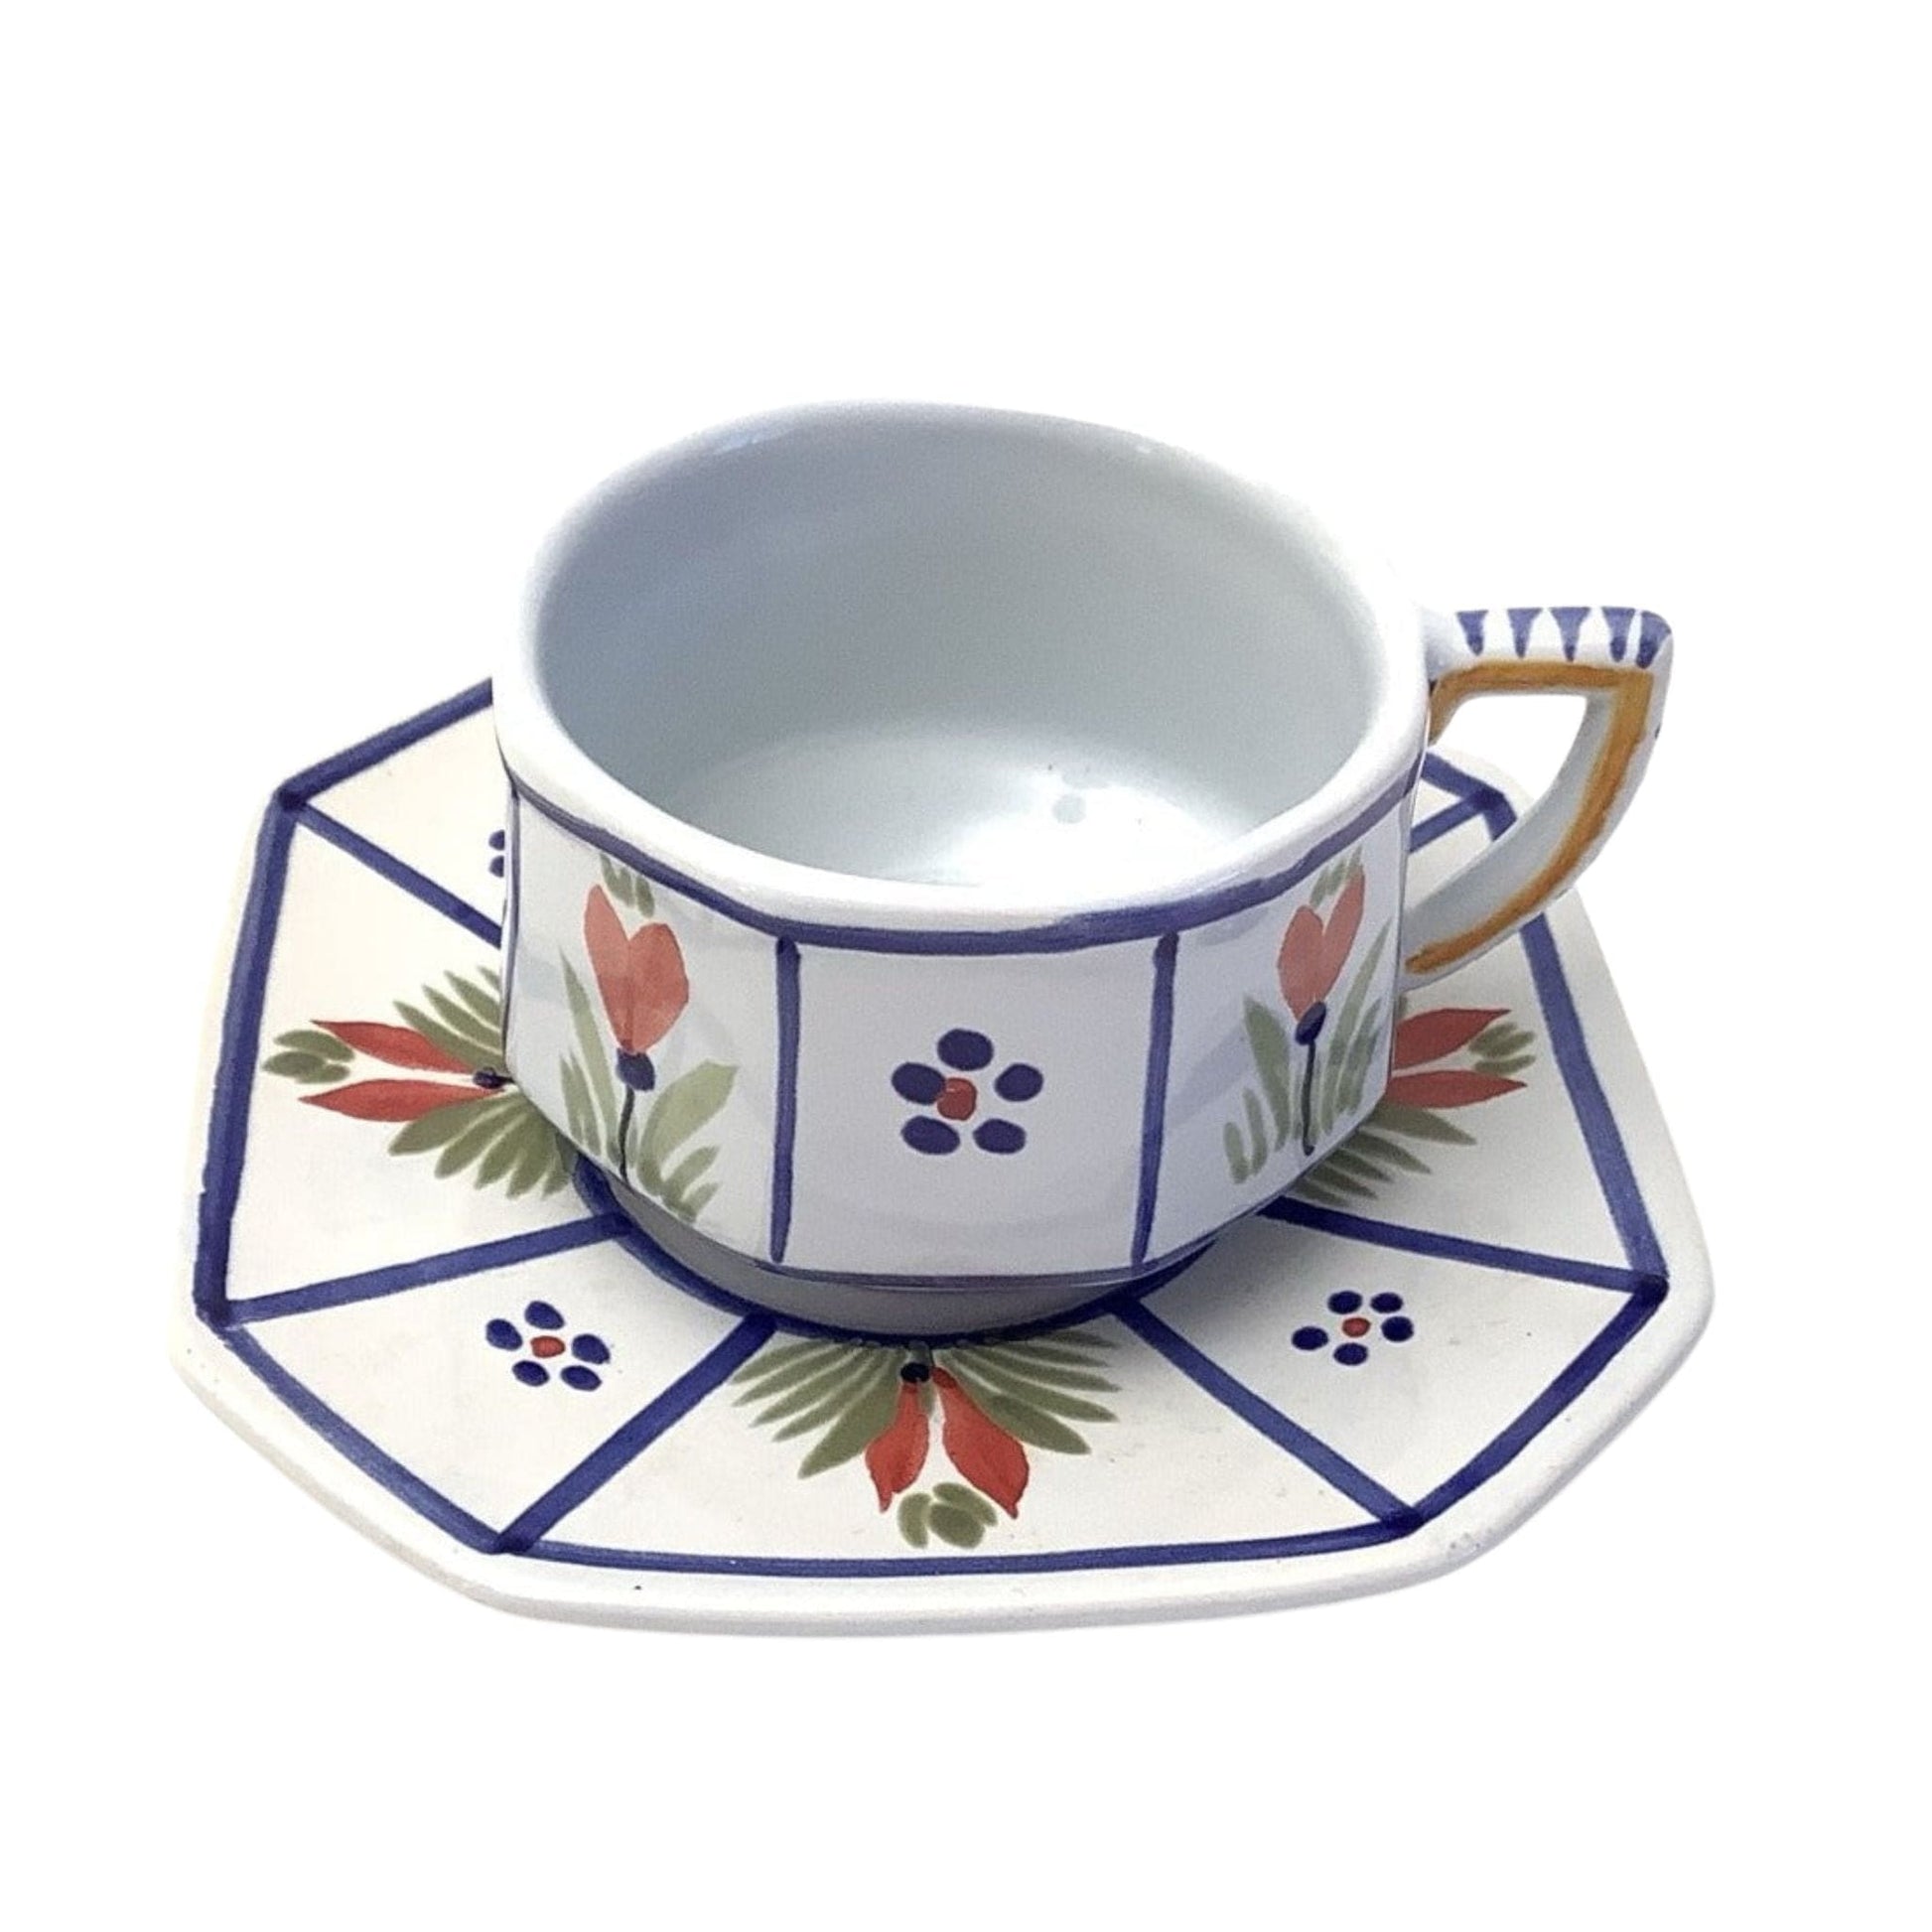 Henriot Man Cup and Saucer Multi / Pottery / Faience